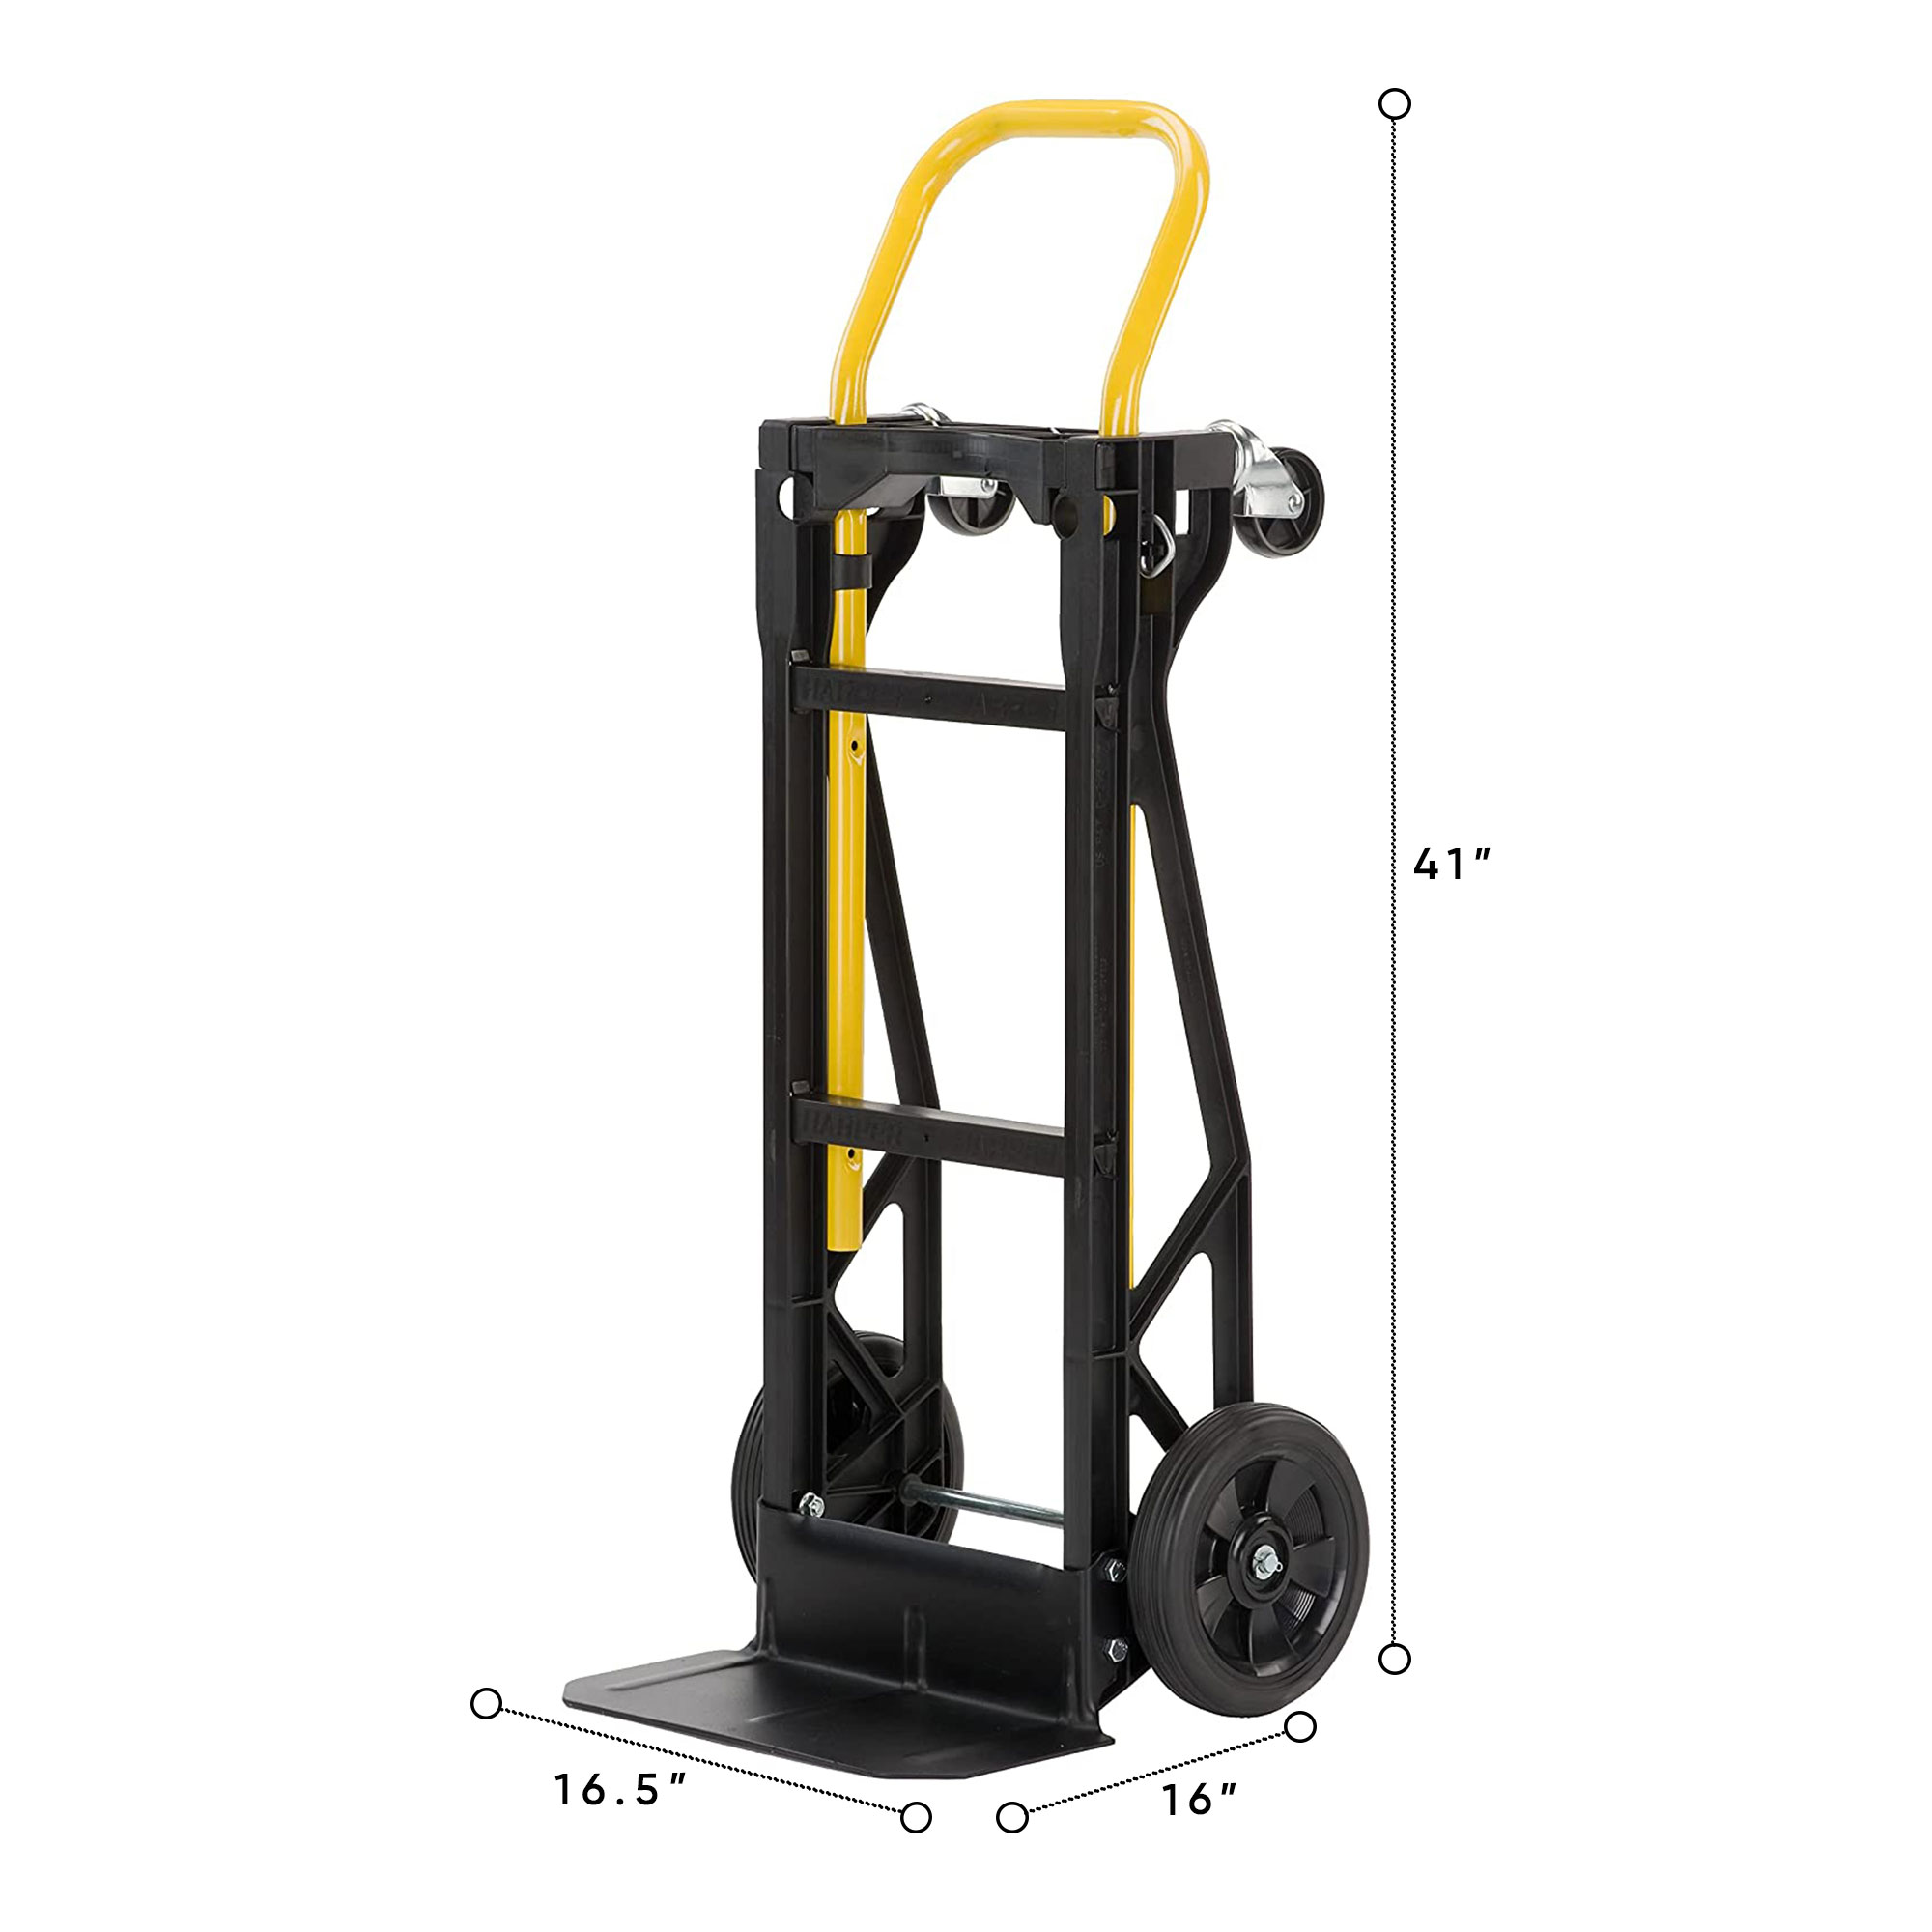 Harper Trucks PJDY2223AKD Hand Truck and Dolly, 400 Lb Capacity, Black - image 4 of 5